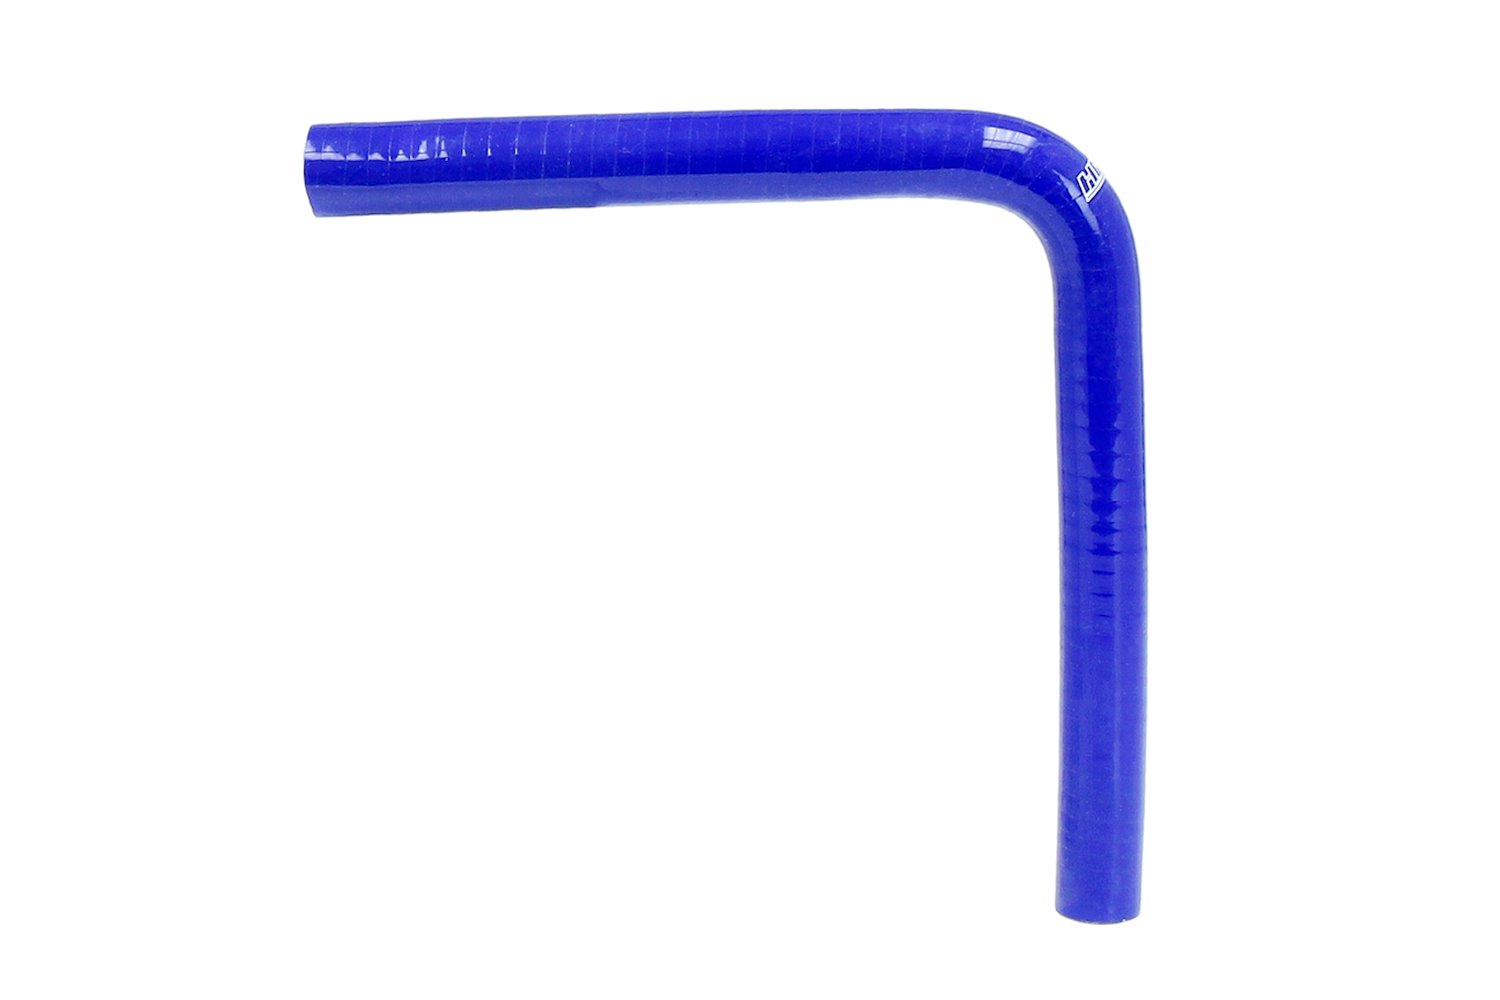 HTSEC90-162-BLUE Silicone 90-Degree Elbow Coupler Hose, High-Temp 4-Ply Reinforced, 1-5/8 in. ID, Blue